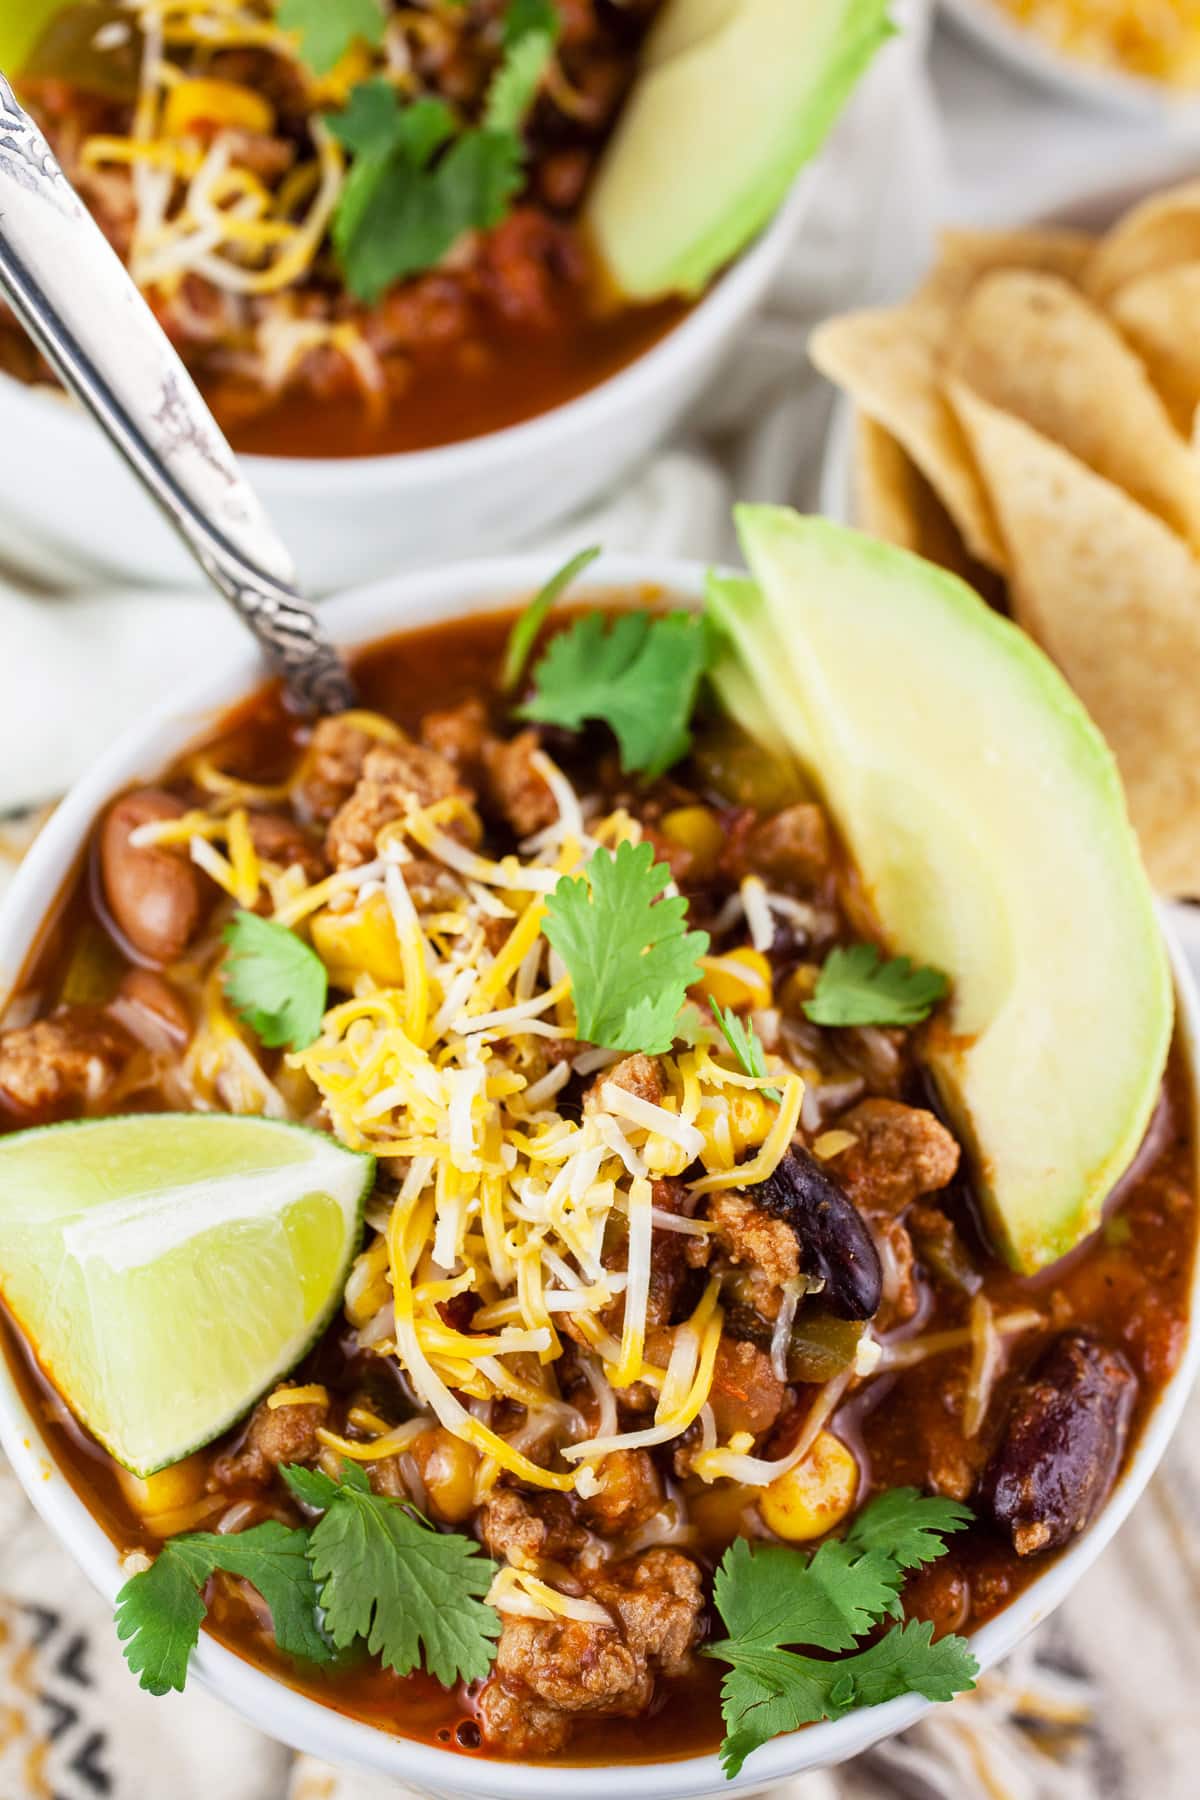 Slow cooker turkey chili in white bowls with sliced avocadoes, lime wedge, shredded cheese, and minced cilantro.